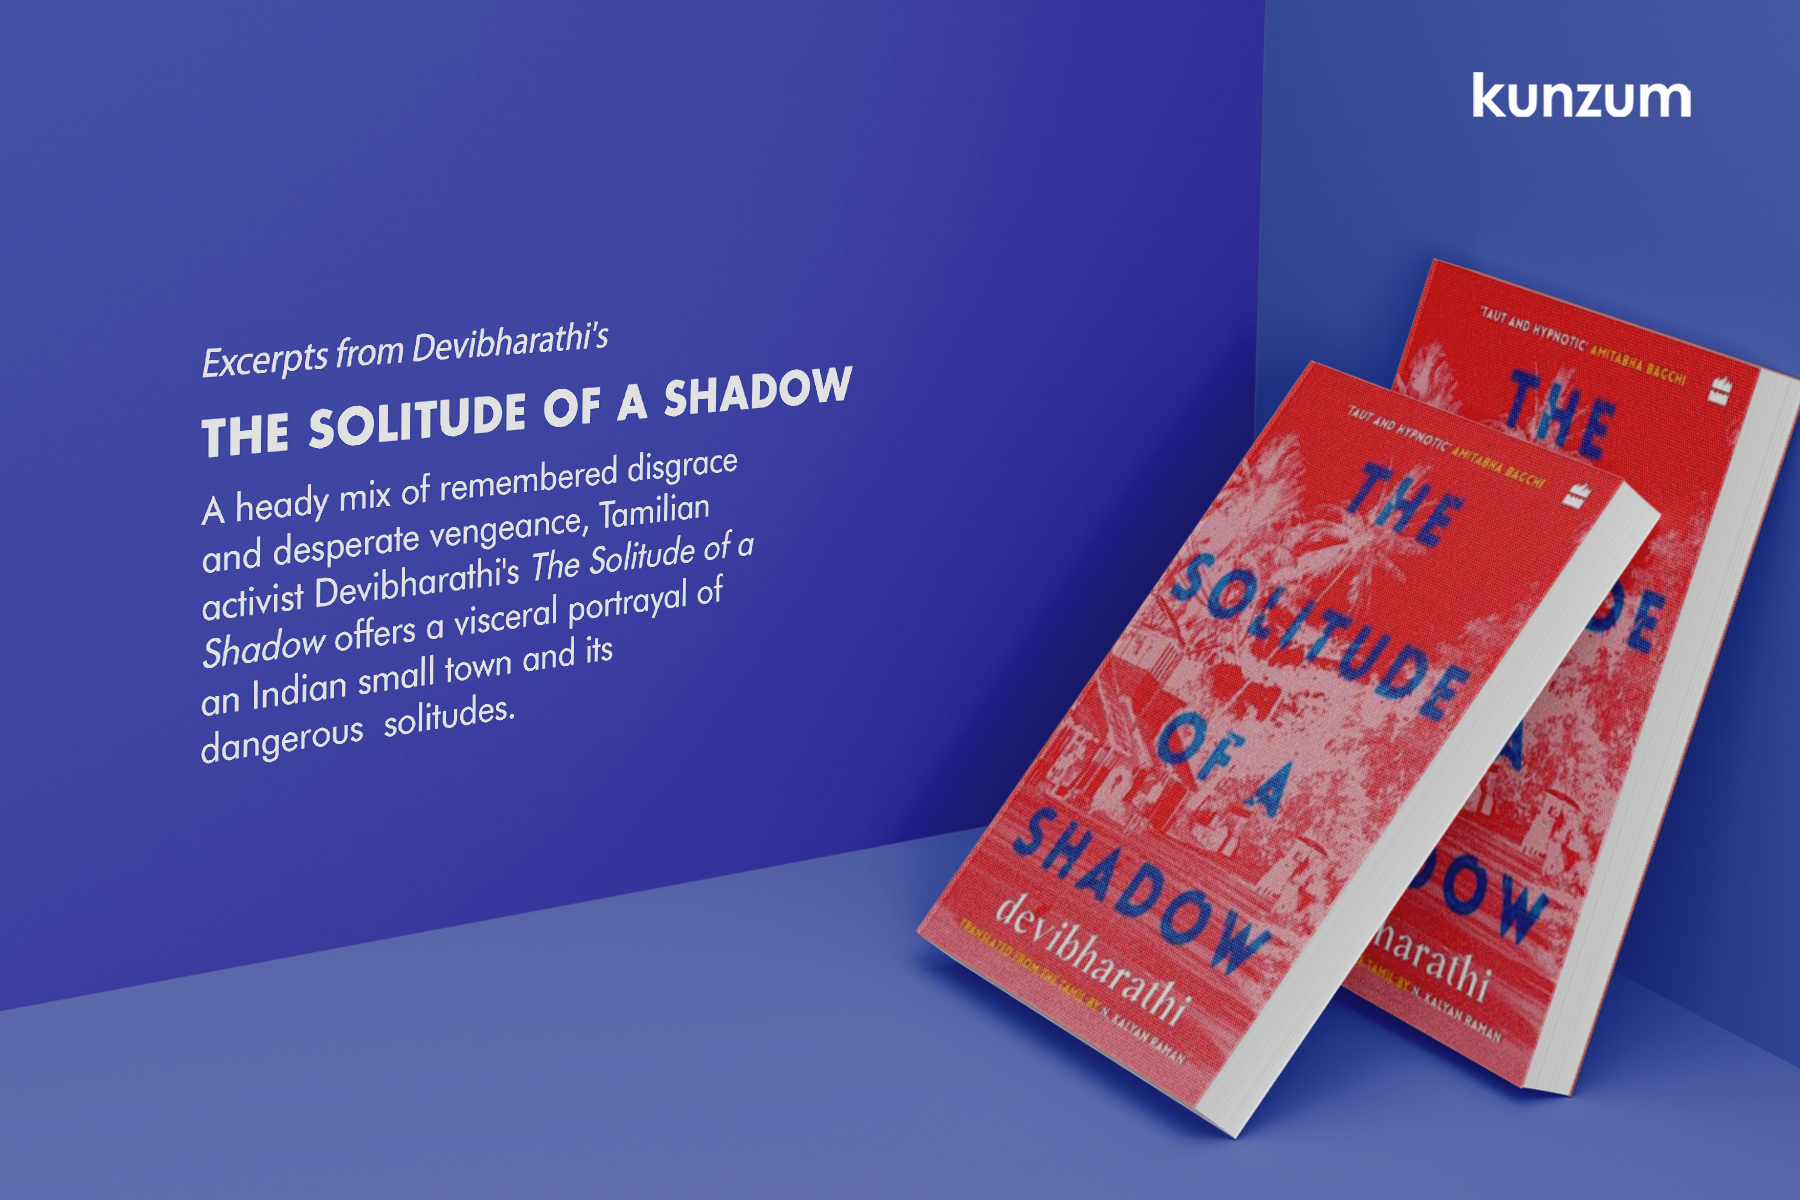 Excerpts from Devibharathi’s The Solitude of a Shadow